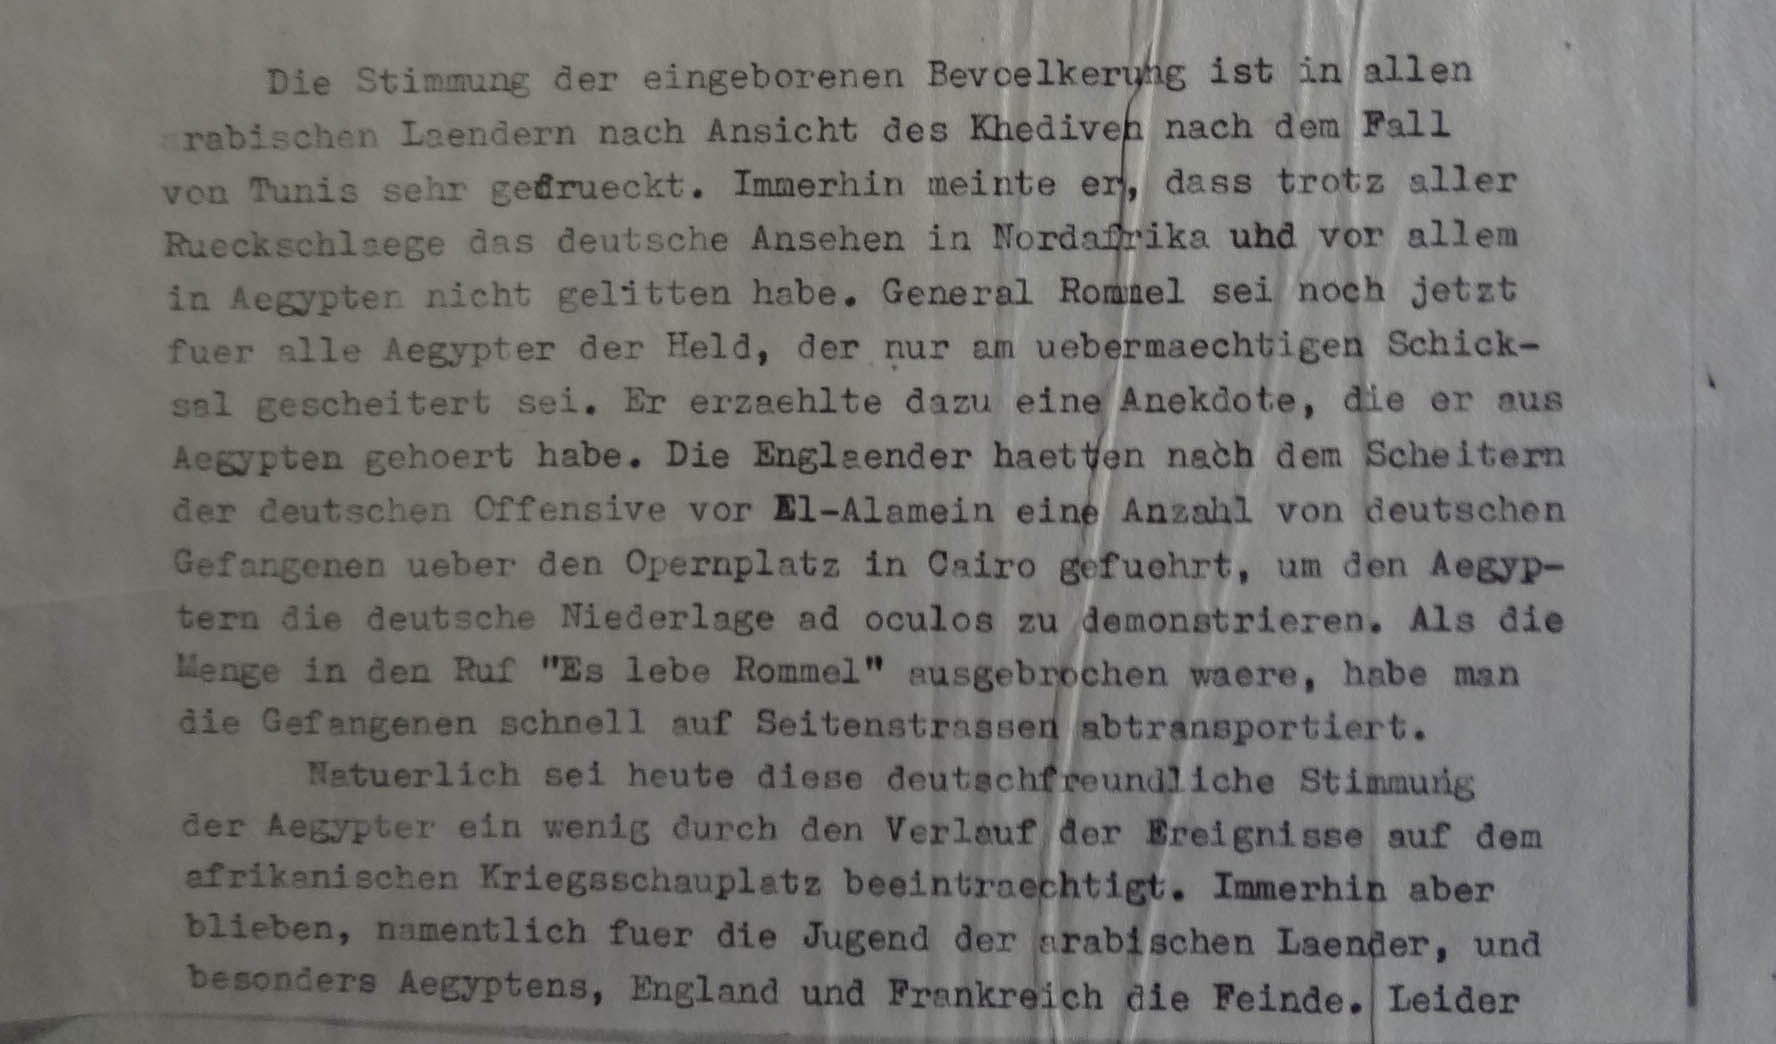 Prüfer to German Foreign Ministry, 17 July 1943 (catalogue reference: GFM 33/607)